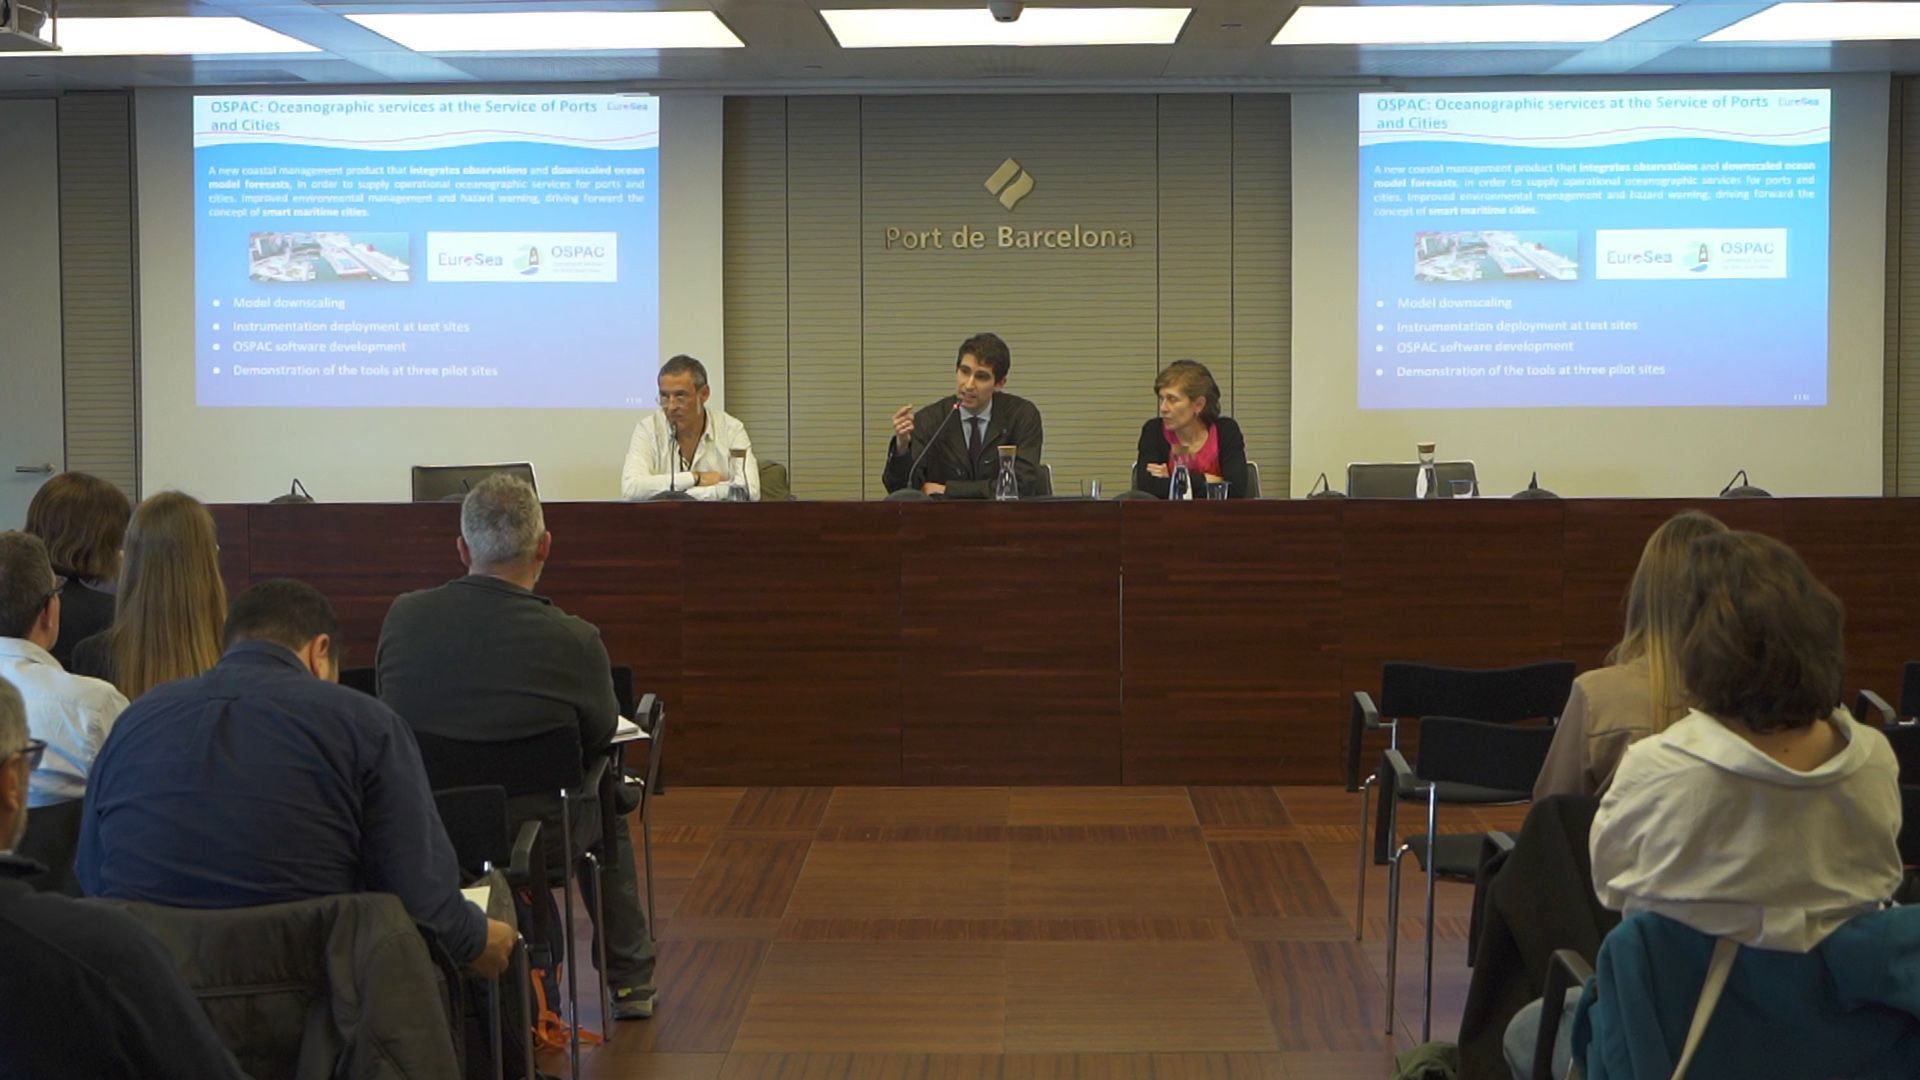 The Port of Barcelona was the venue chosen to present the OSPAC tool. (PierNext)